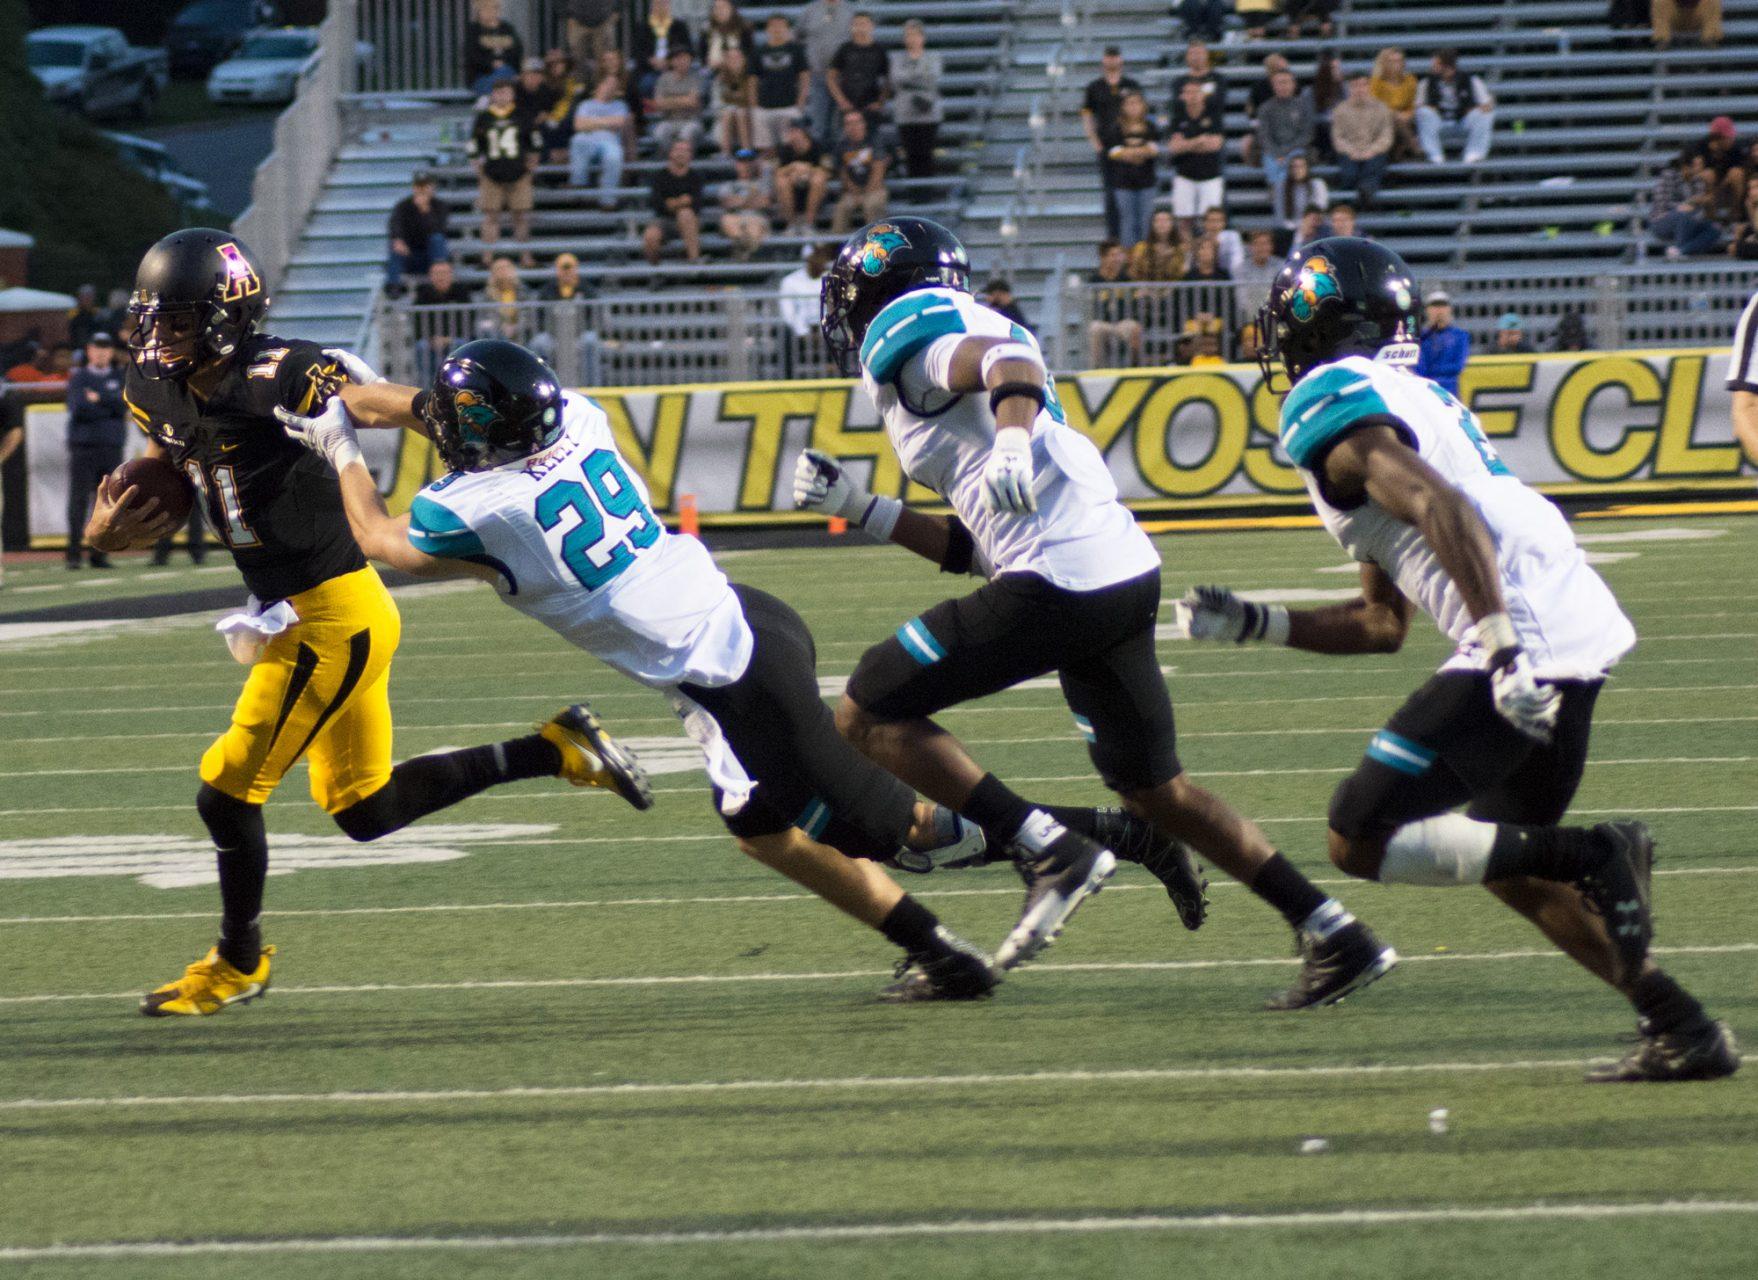 Taylor Lamb running for a first down against Coastal Carolina at Kidd Brewer Stadium.  Lamb set the all-time App State record for career passing touchdowns in today's win.